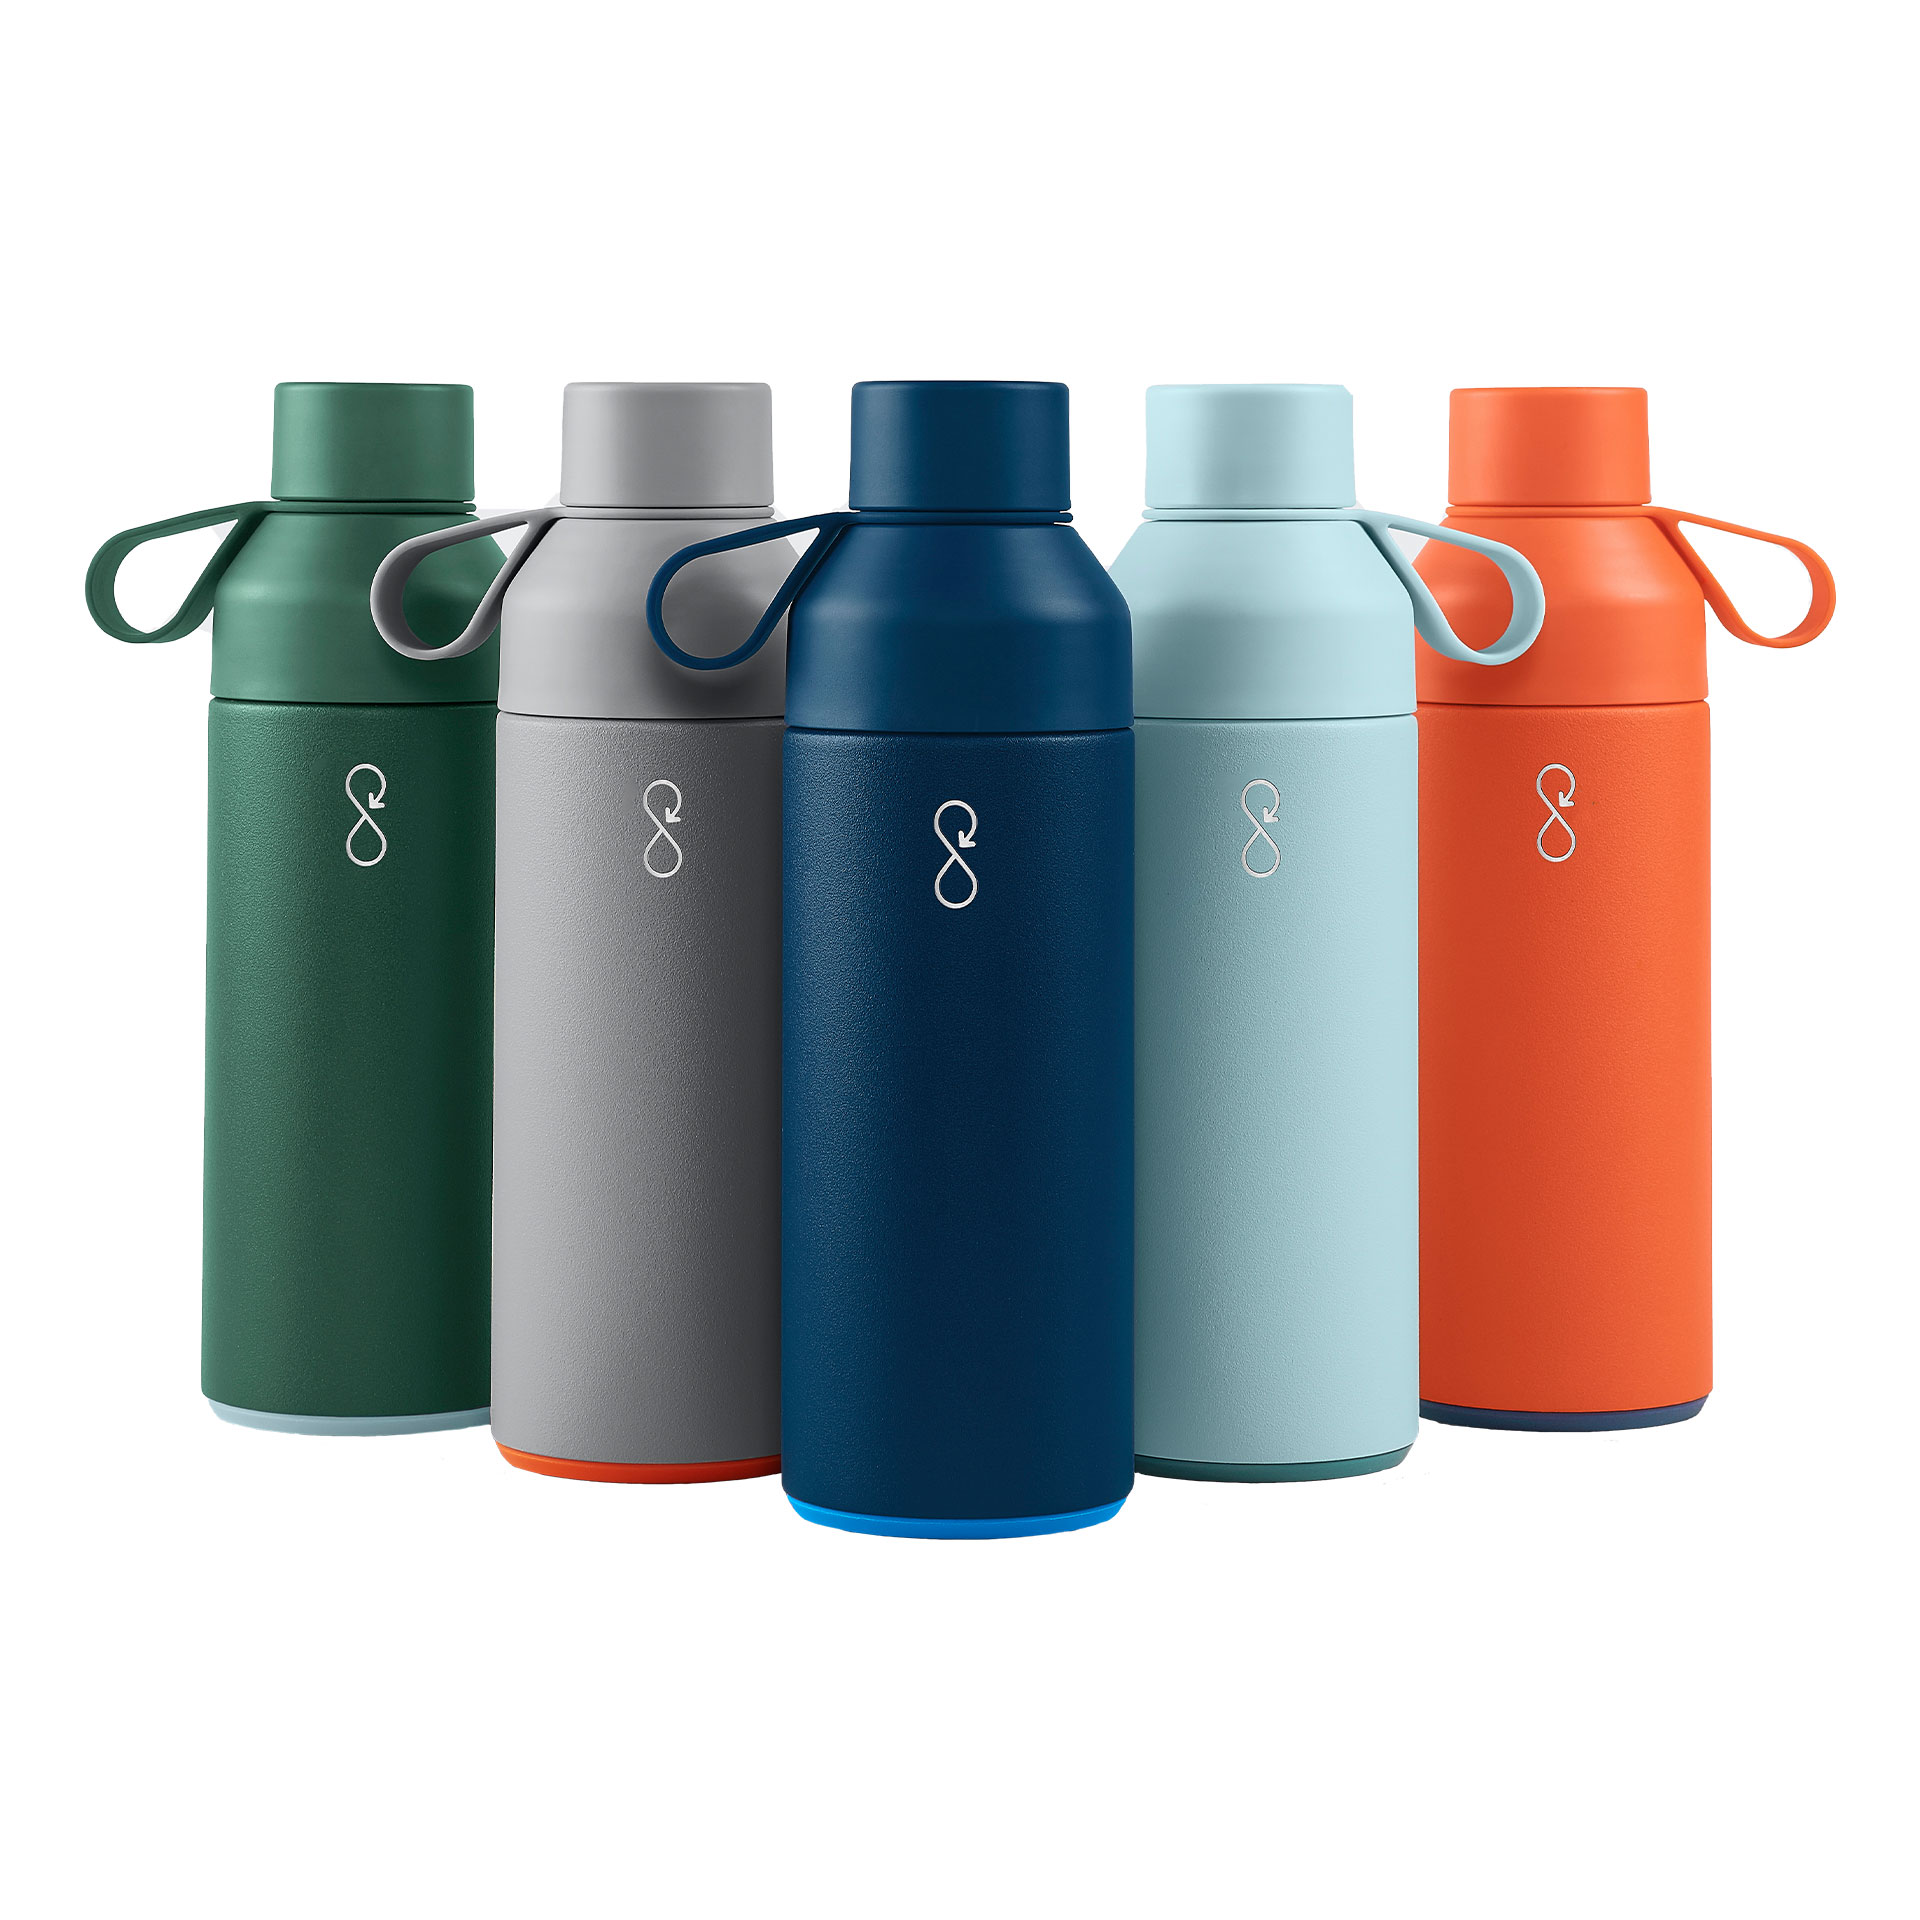 The Ocean Bottle is made from part recycled plastic and stainless steel. Each bottle funds the collection of 11.4kg of plastic, equivalent to 1000 plastic bottles. Plastic Bank ensures that the plastic waste is collected by locals living in coastal communities, mostly in Asia. This bottle is vacuum thermos insulated, this means it keeps cold drinks cold and hot drinks hot. It comes with an easy carry silicone loop, double opening for easy drink and a clean drinking cup. Dishwasher safe. 500ml capacity.